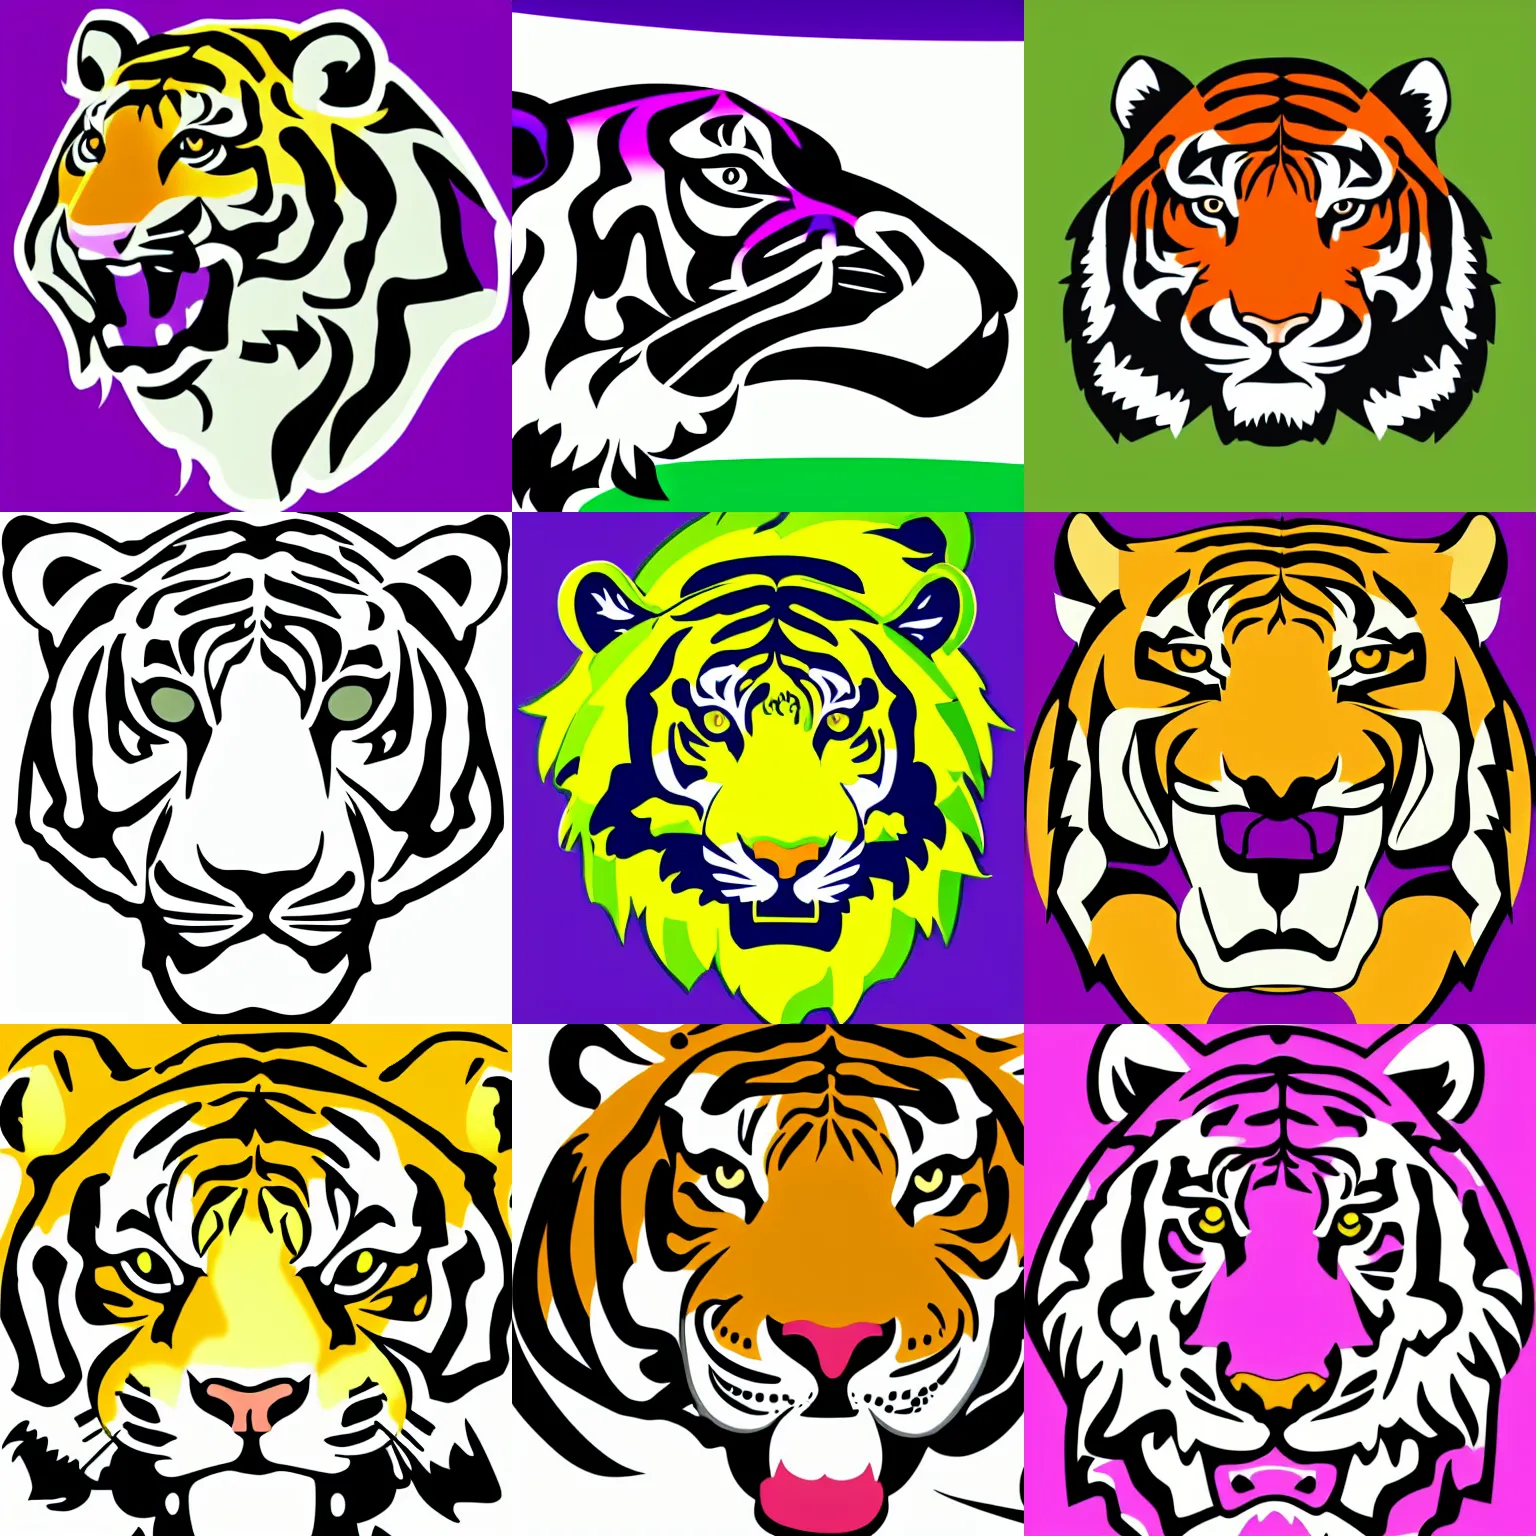 Prompt: a tiger vector graphics logo, roaring head of the tiger, side view, lime and violet highlights